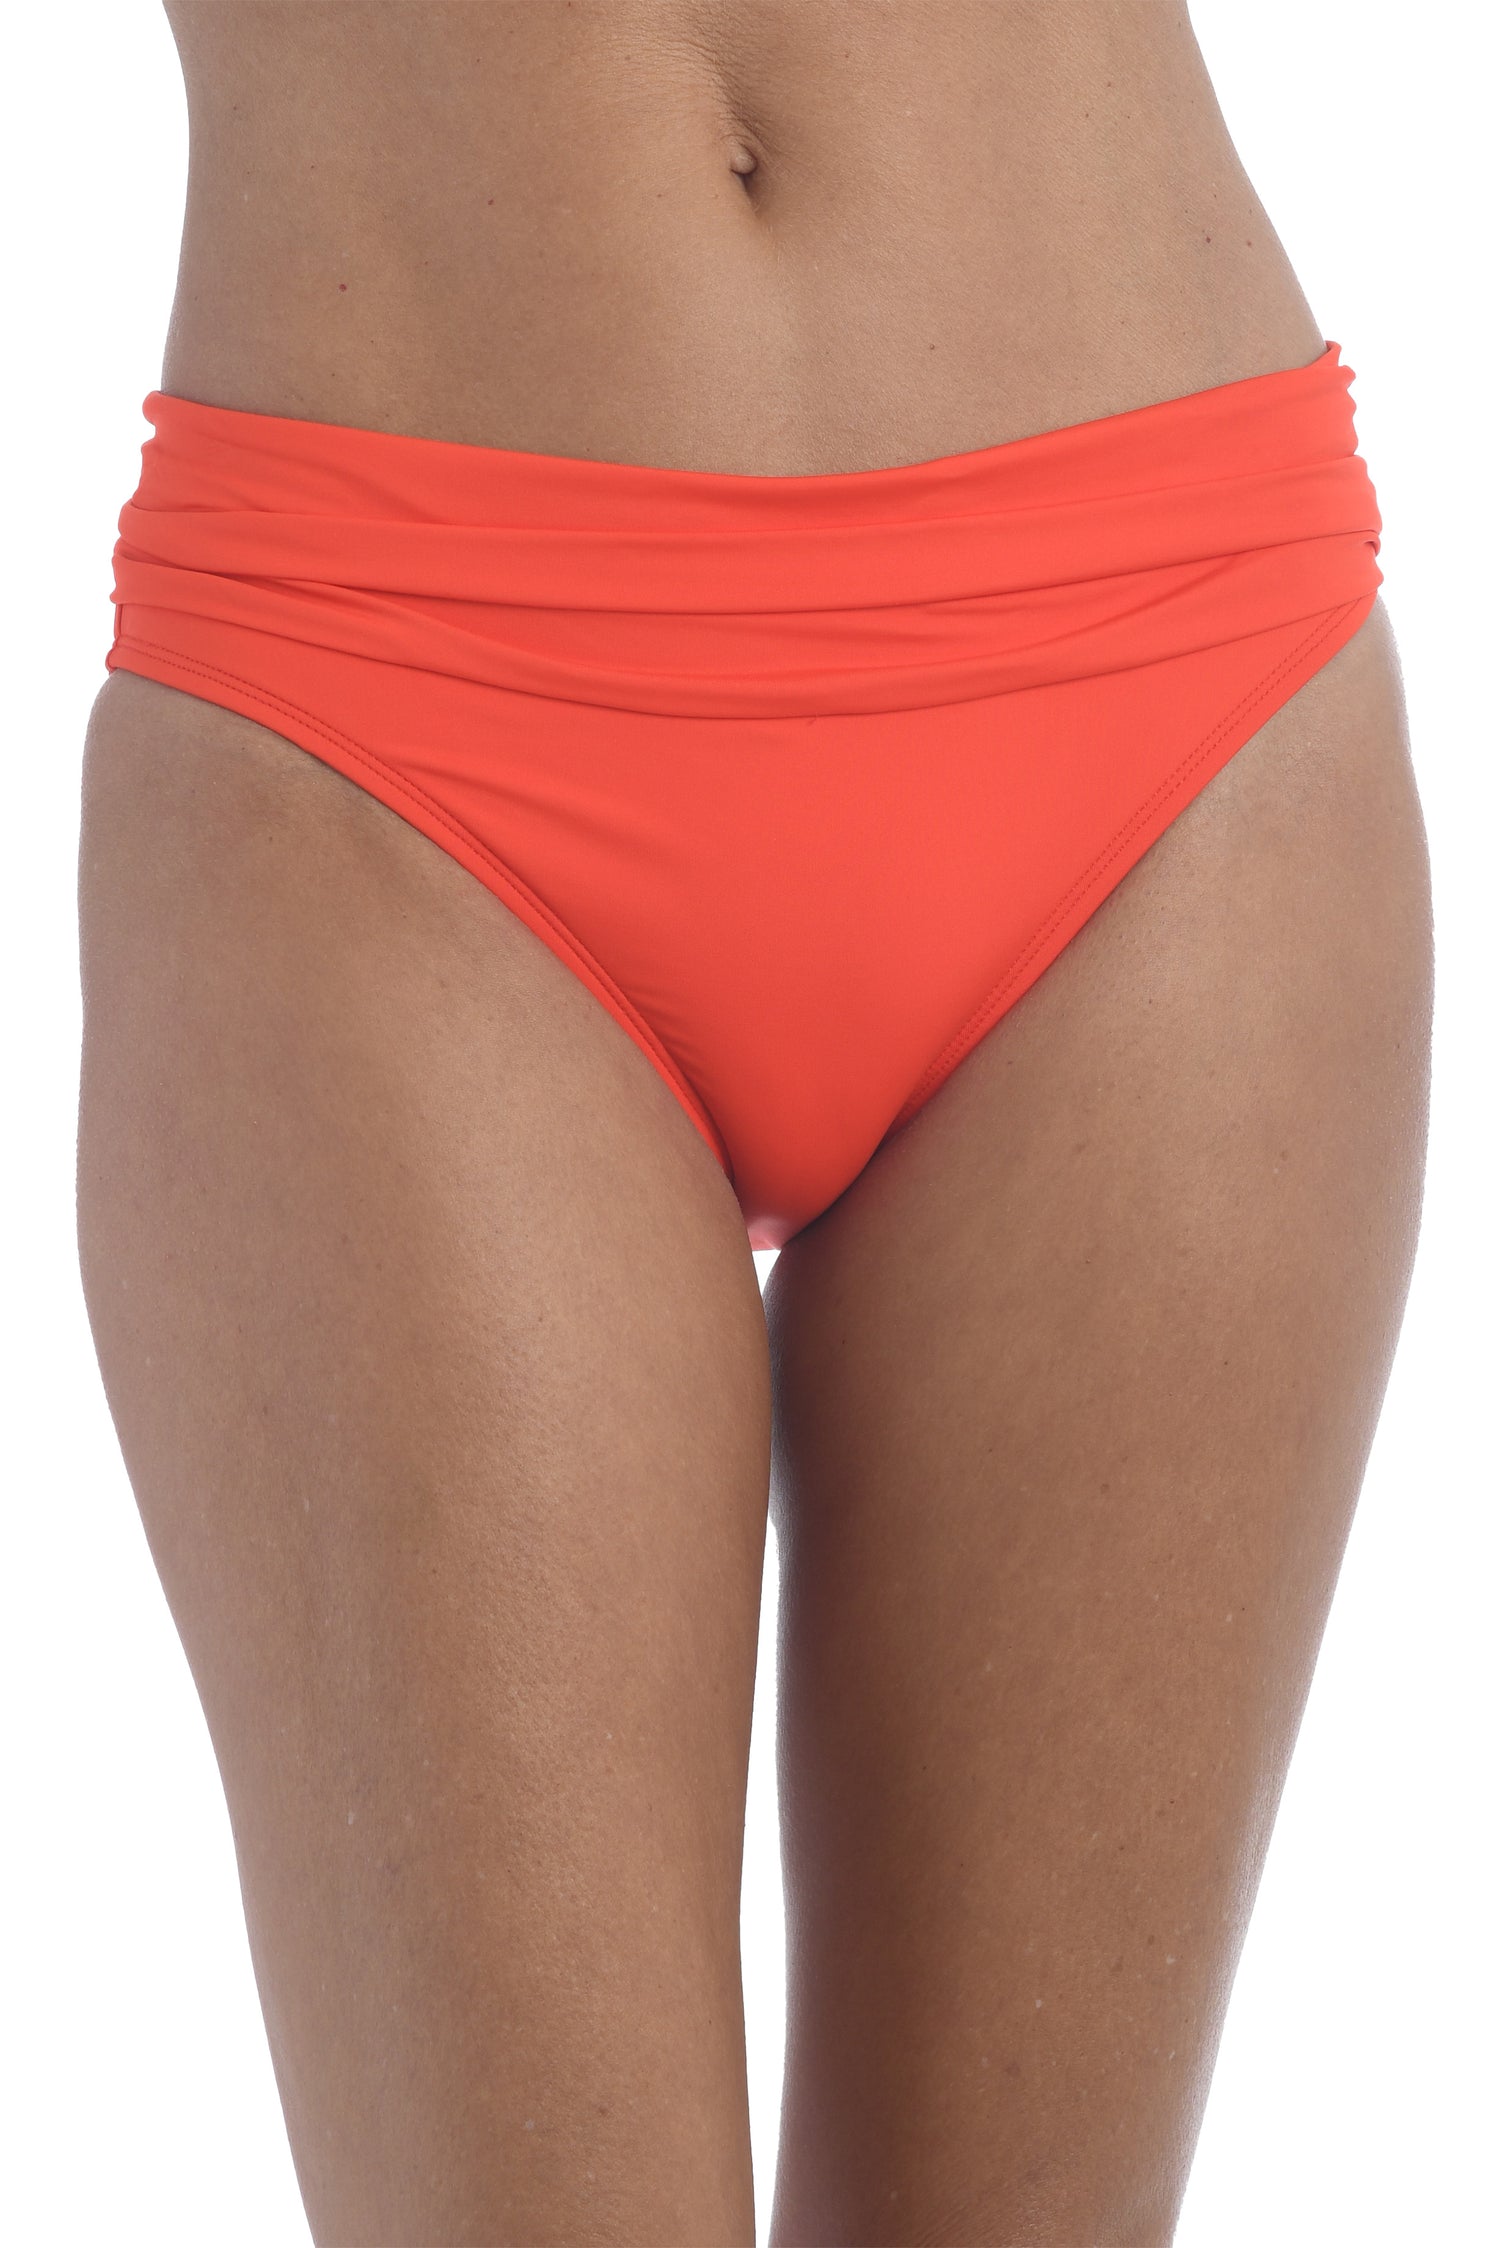 Model is wearing a paprika colored hipster swimsuit bottom from our Best-Selling Island Goddess collection.